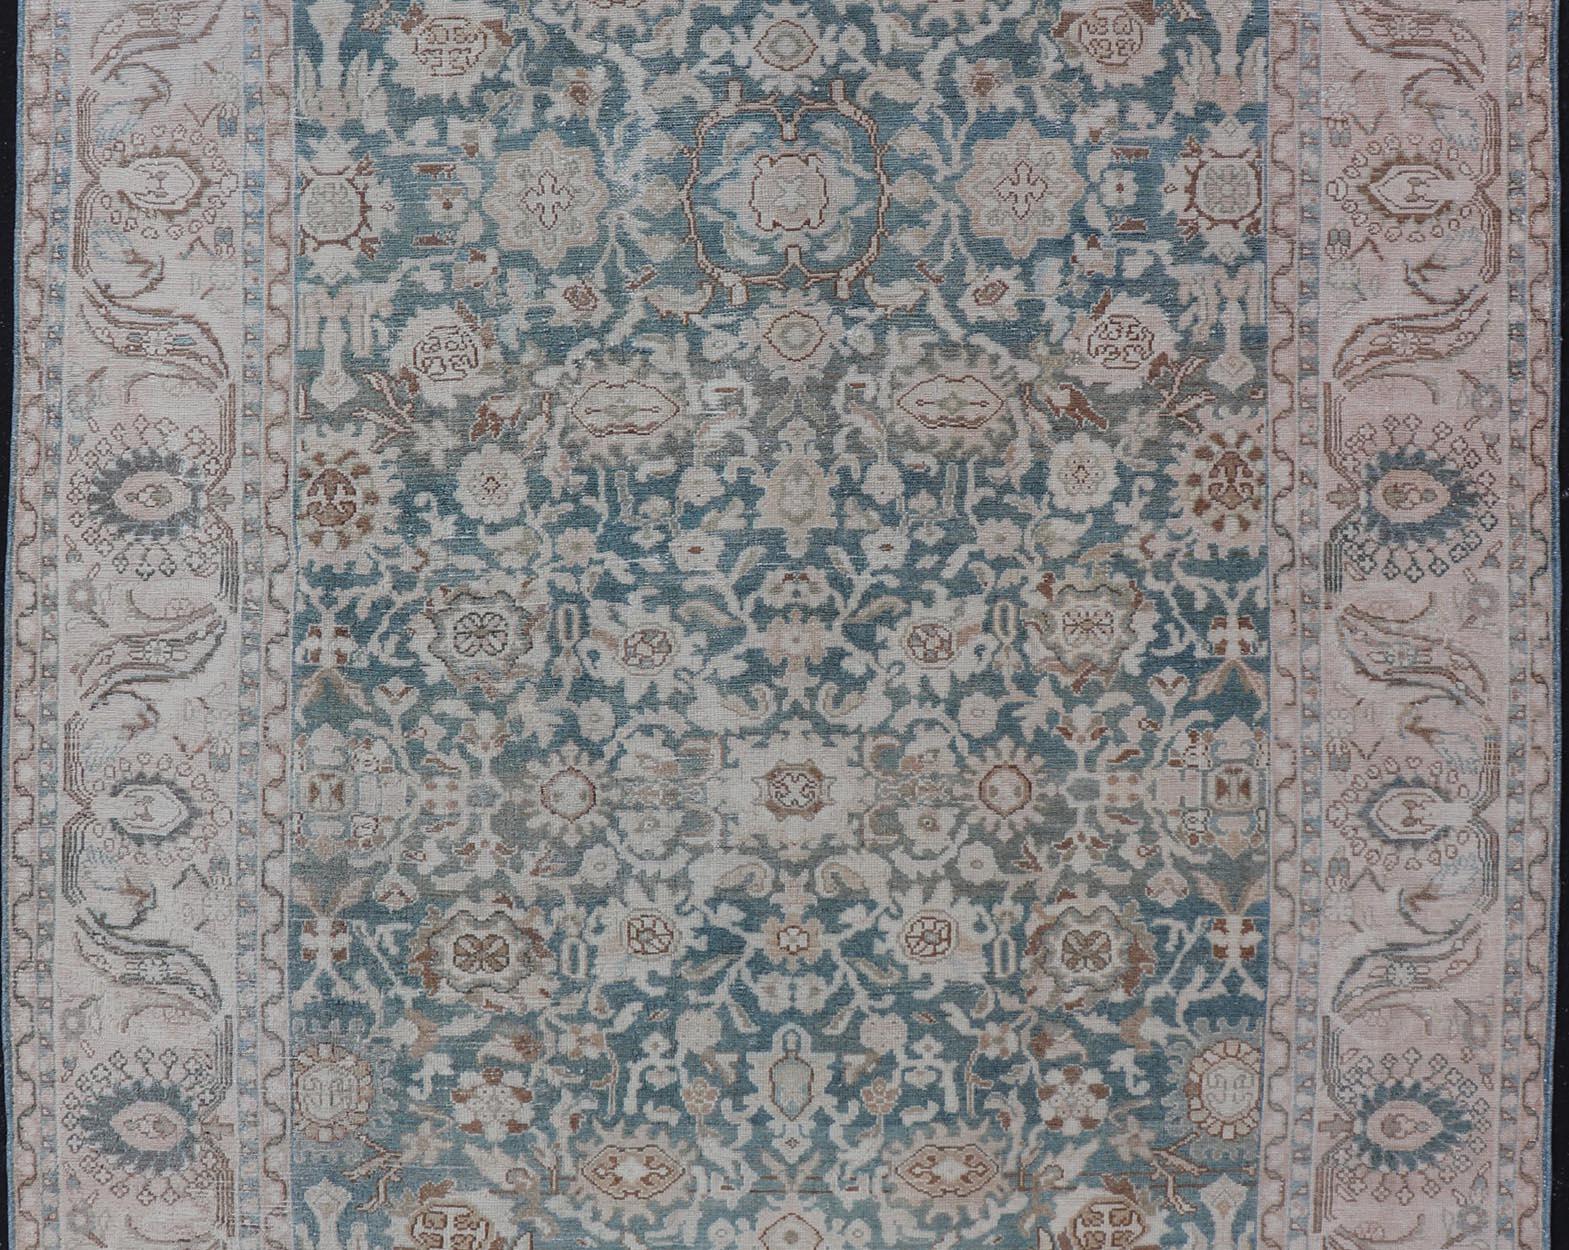 Measures: 7'0 x 9'10 

This antique persian Hamadan displaying a light green background with a cream border. The design is floral, the center having a tight and busy design, heavily decorating the field with vines, flowers, and other motifs. The